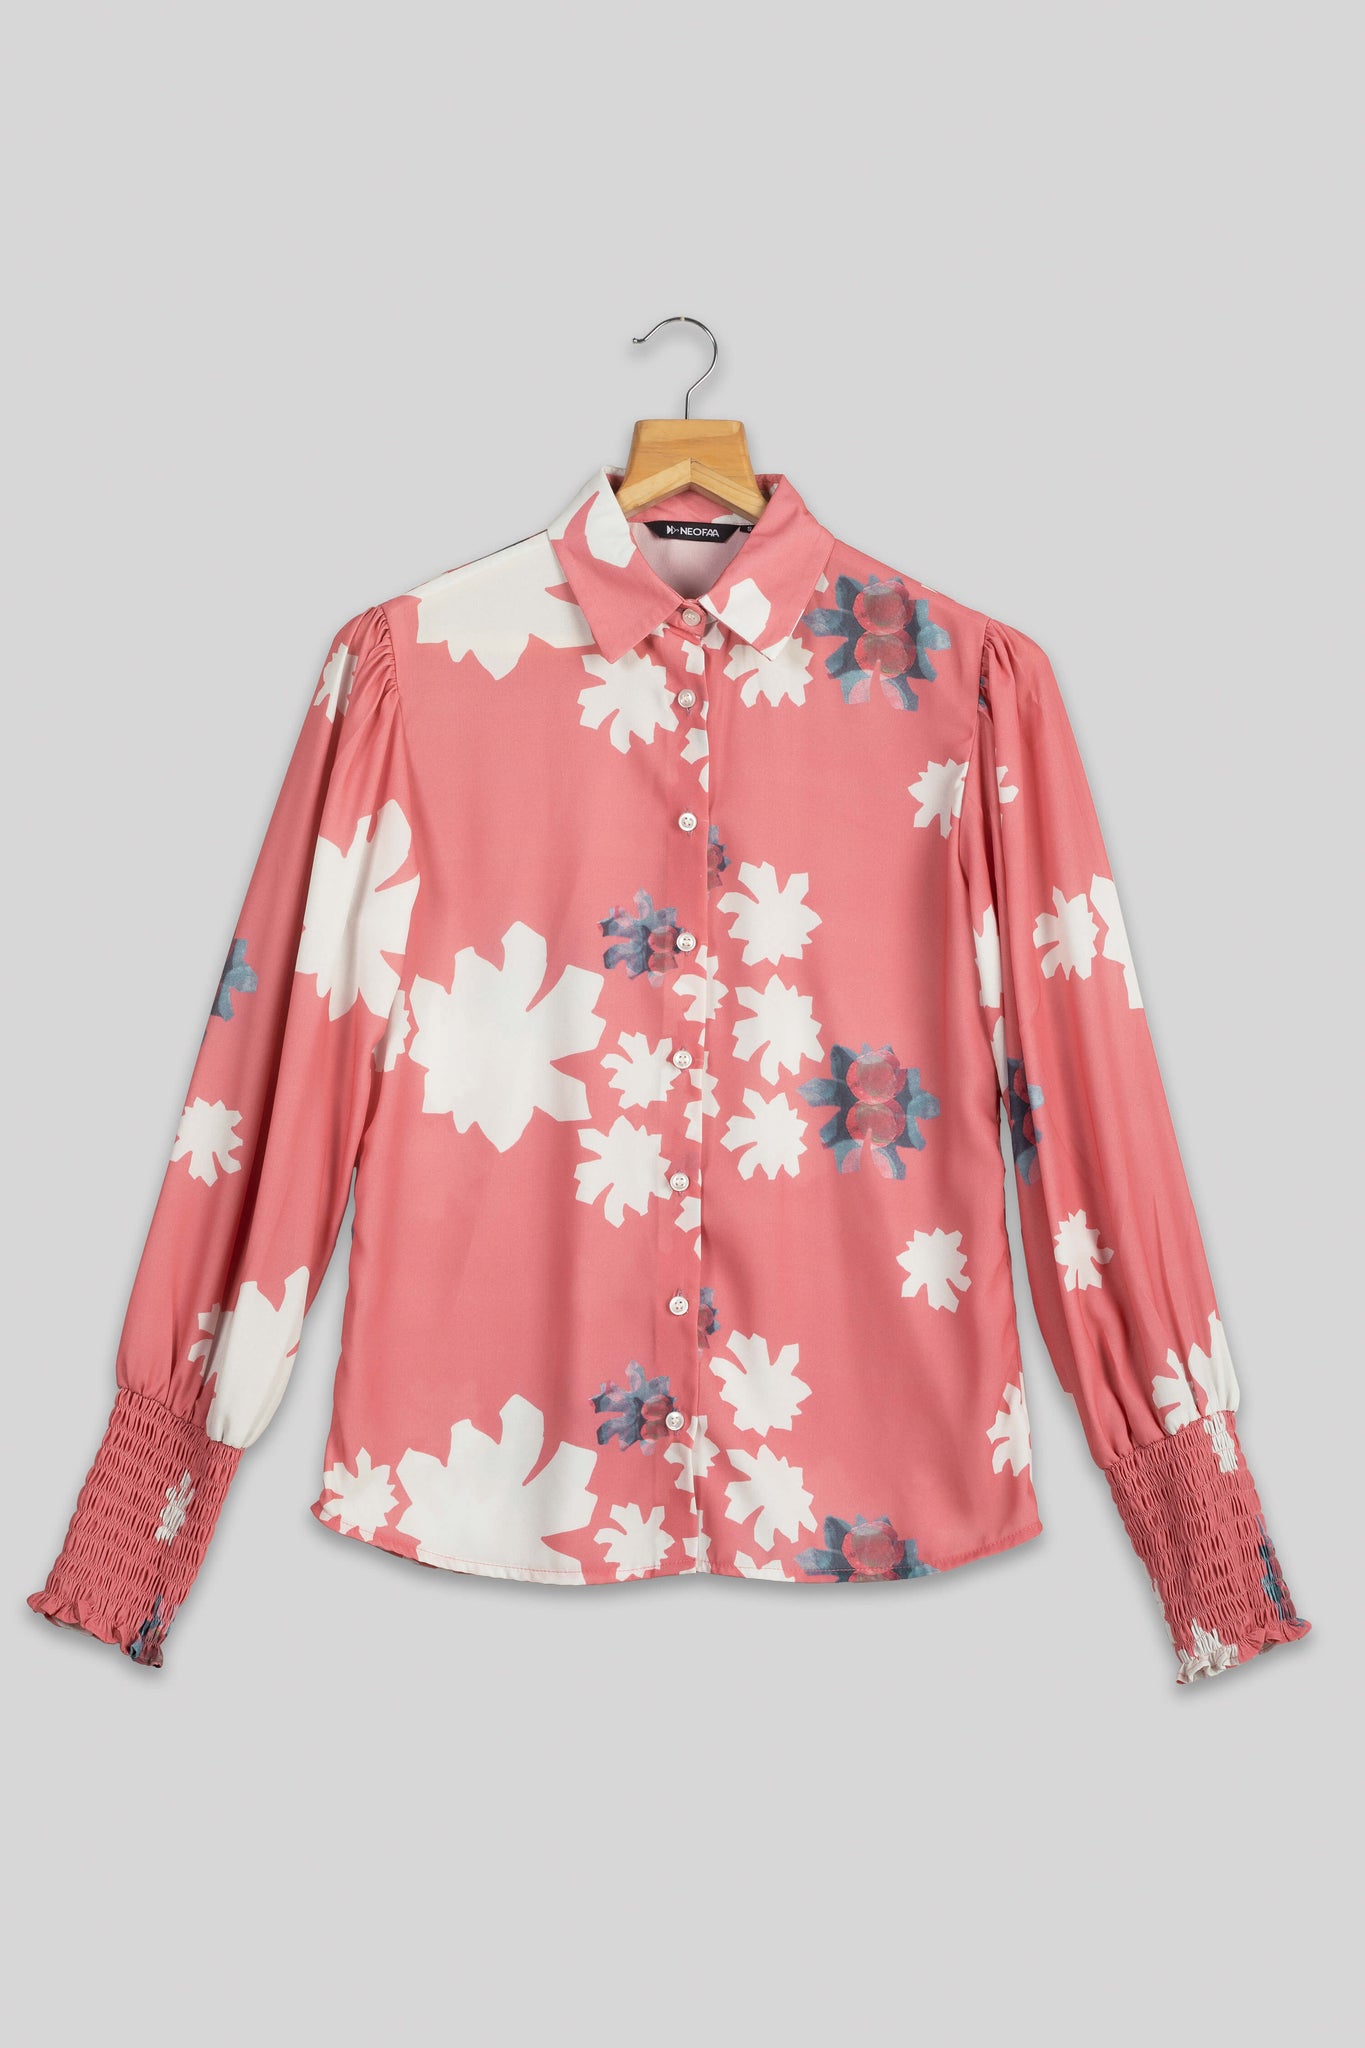 Fashionable Floral Trendy Sleeve Shirt For Women